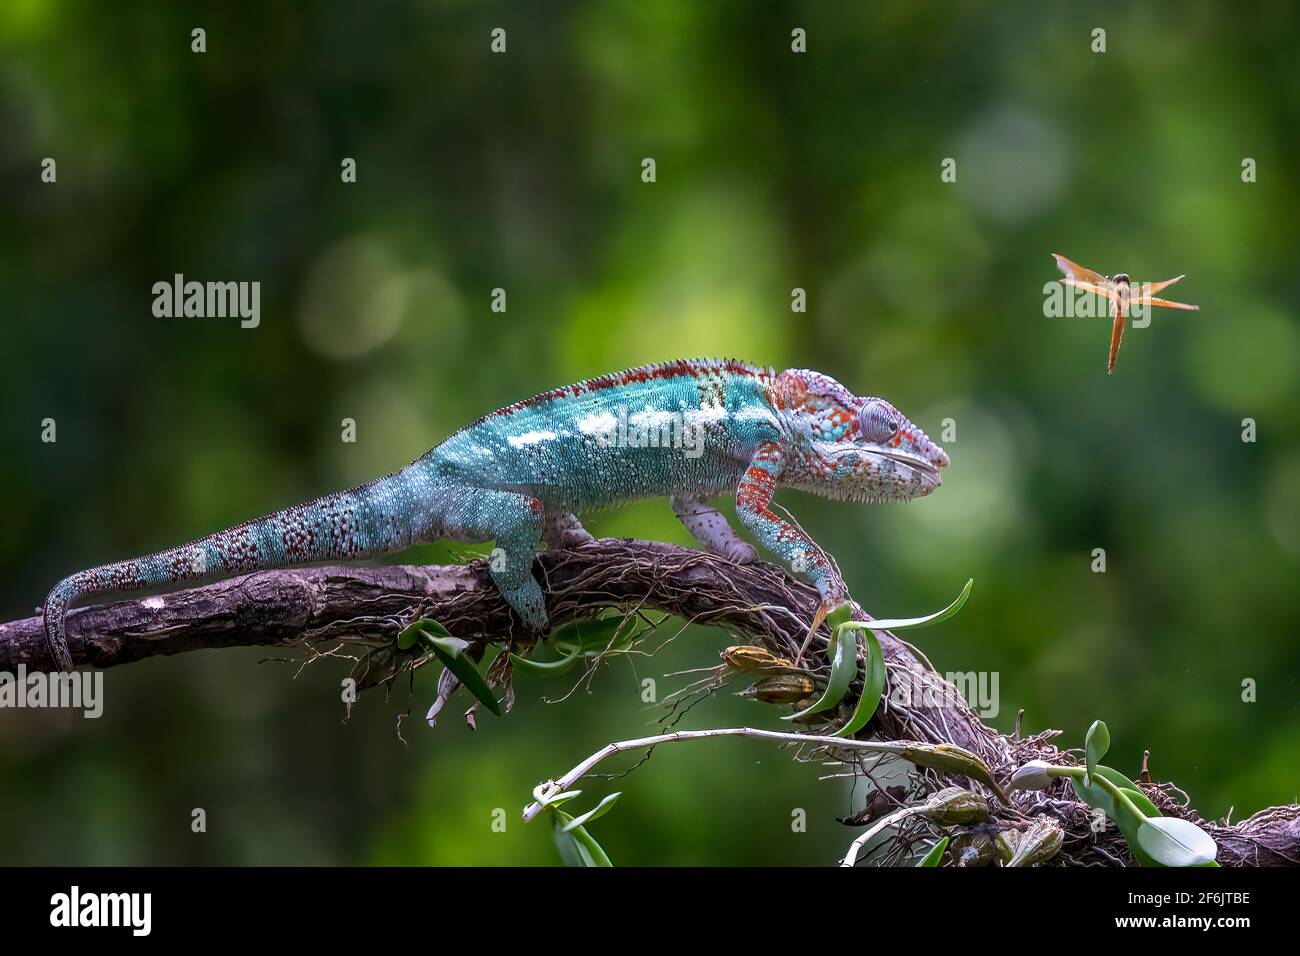 The chameleon uses its 180-degree vision to sought out its prey and measures the distance before swiping. BEKSAI, INDONESIA: ACTION packed images show Stock Photo